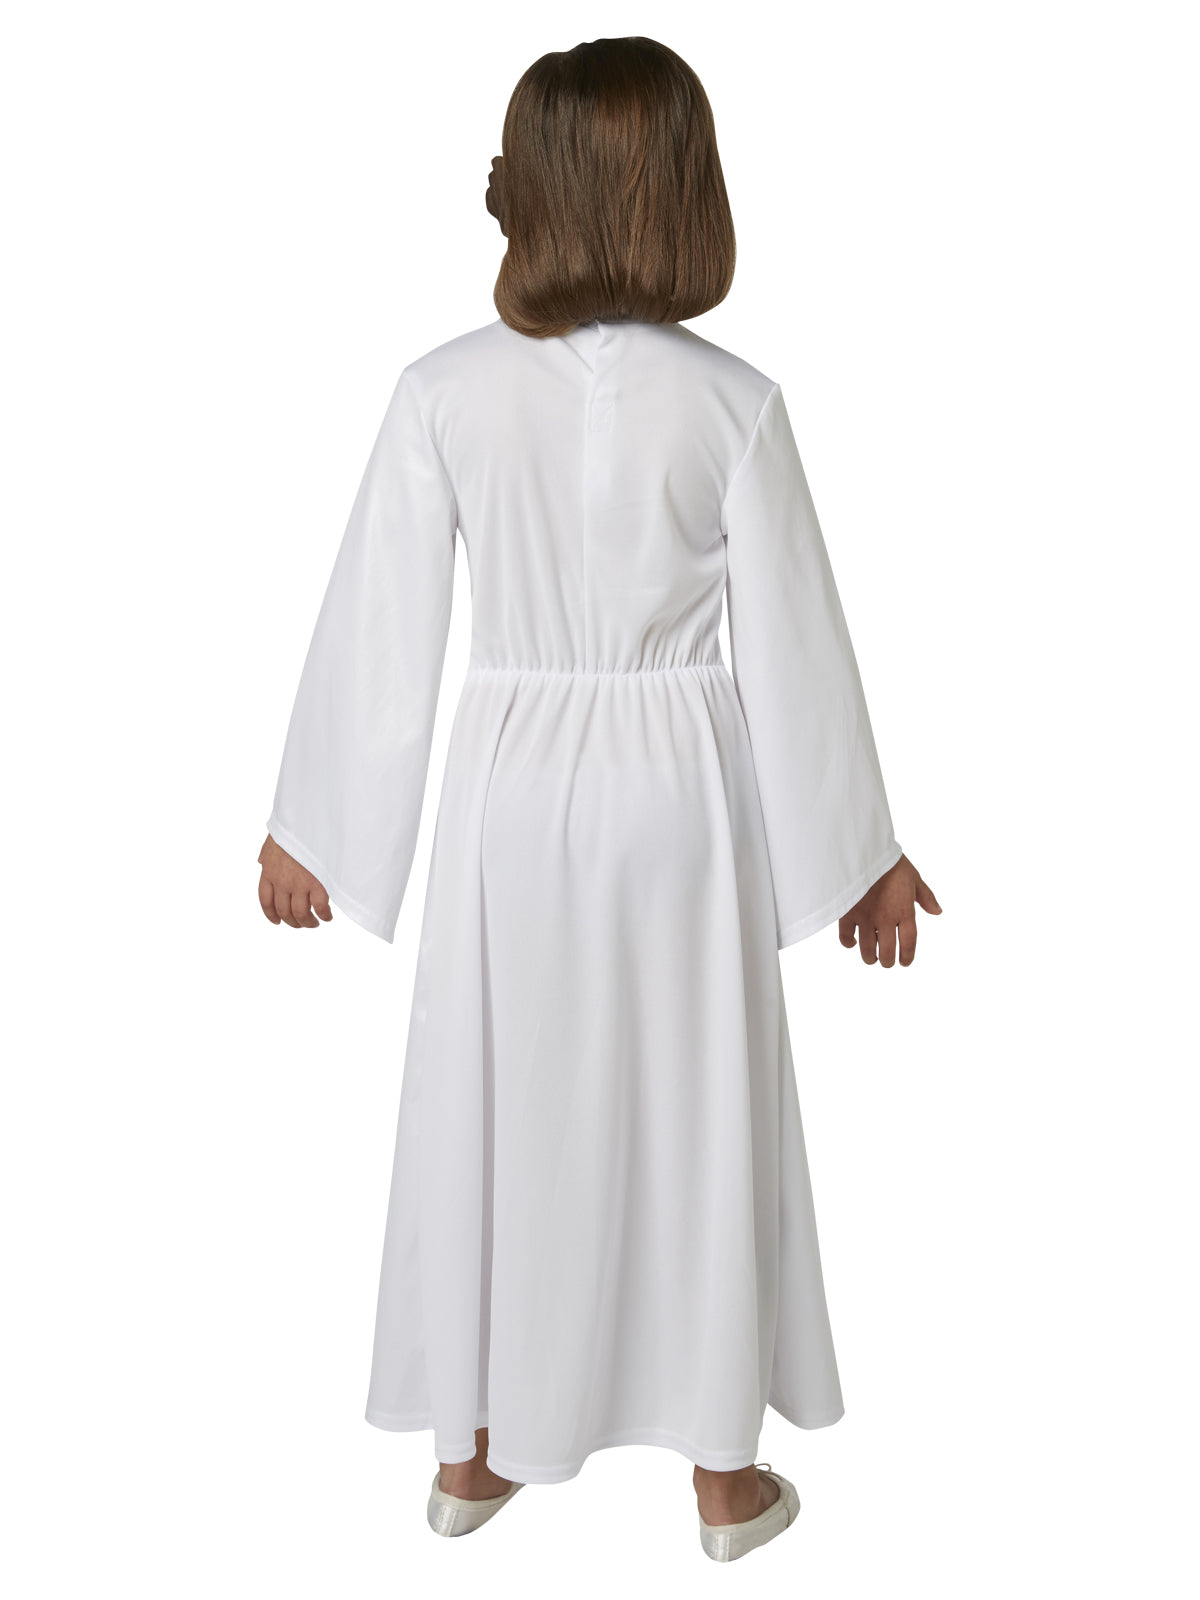 Star Wars Princess Leia Deluxe Child Costume